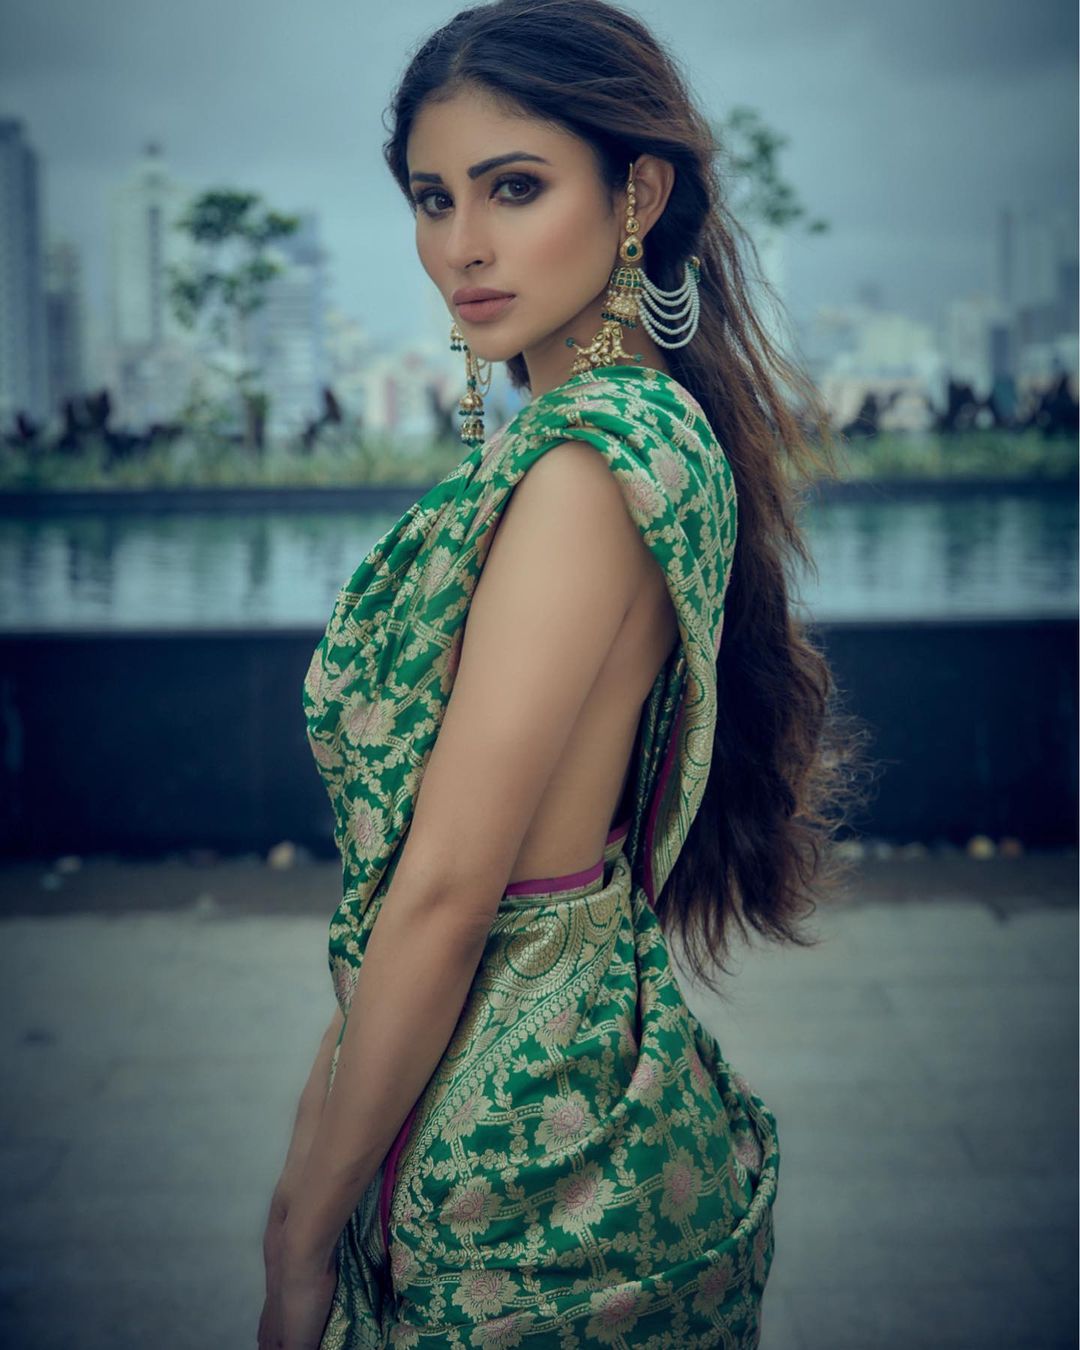 Mouni Roy Wore A Sari Without A Blouse These Bold Photos Created A Ruckus